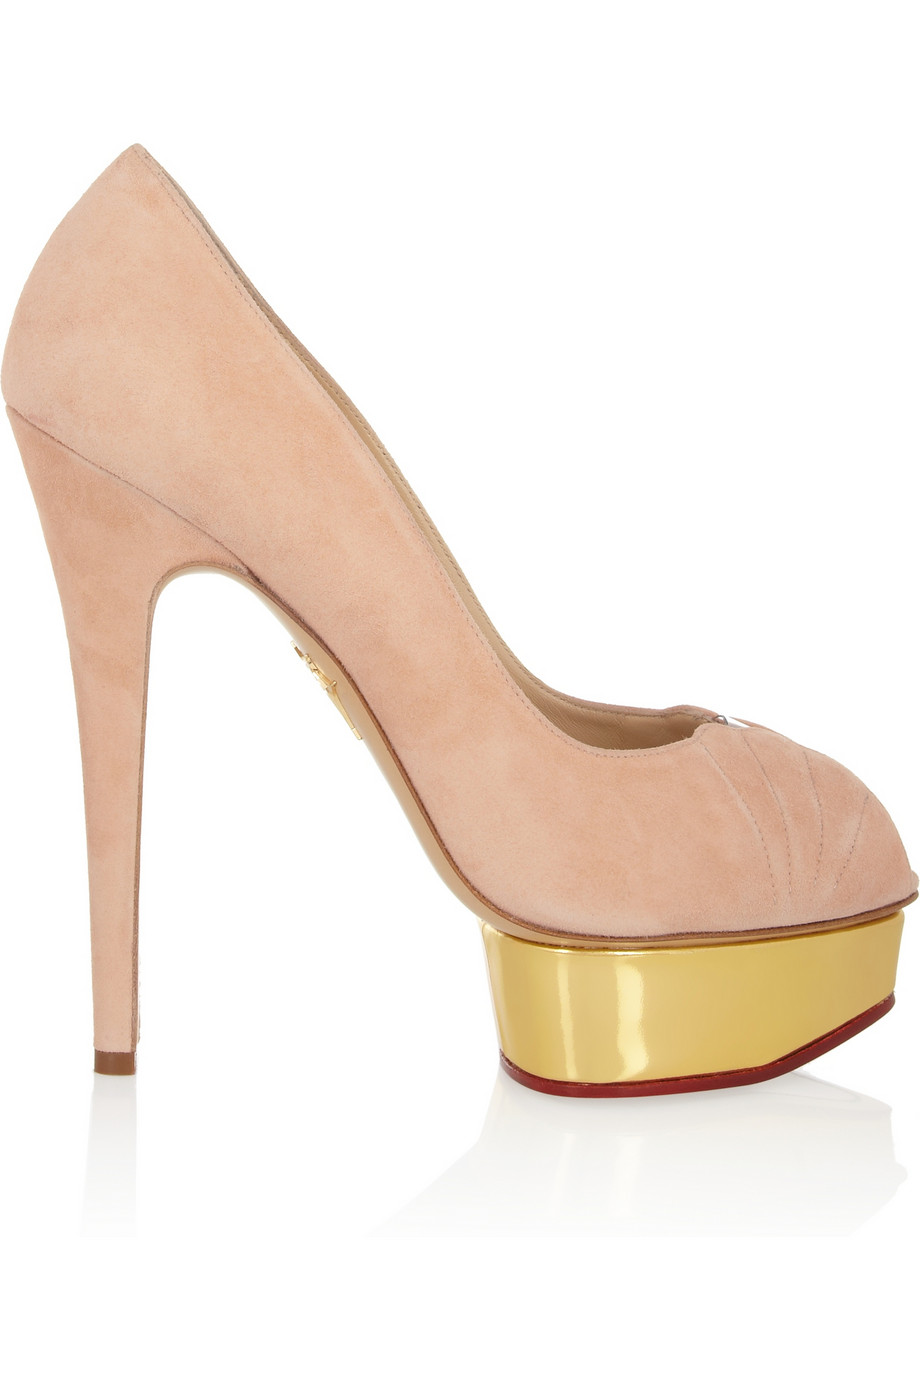 Lyst - Charlotte olympia Dolly Suede Platform Pumps in Metallic